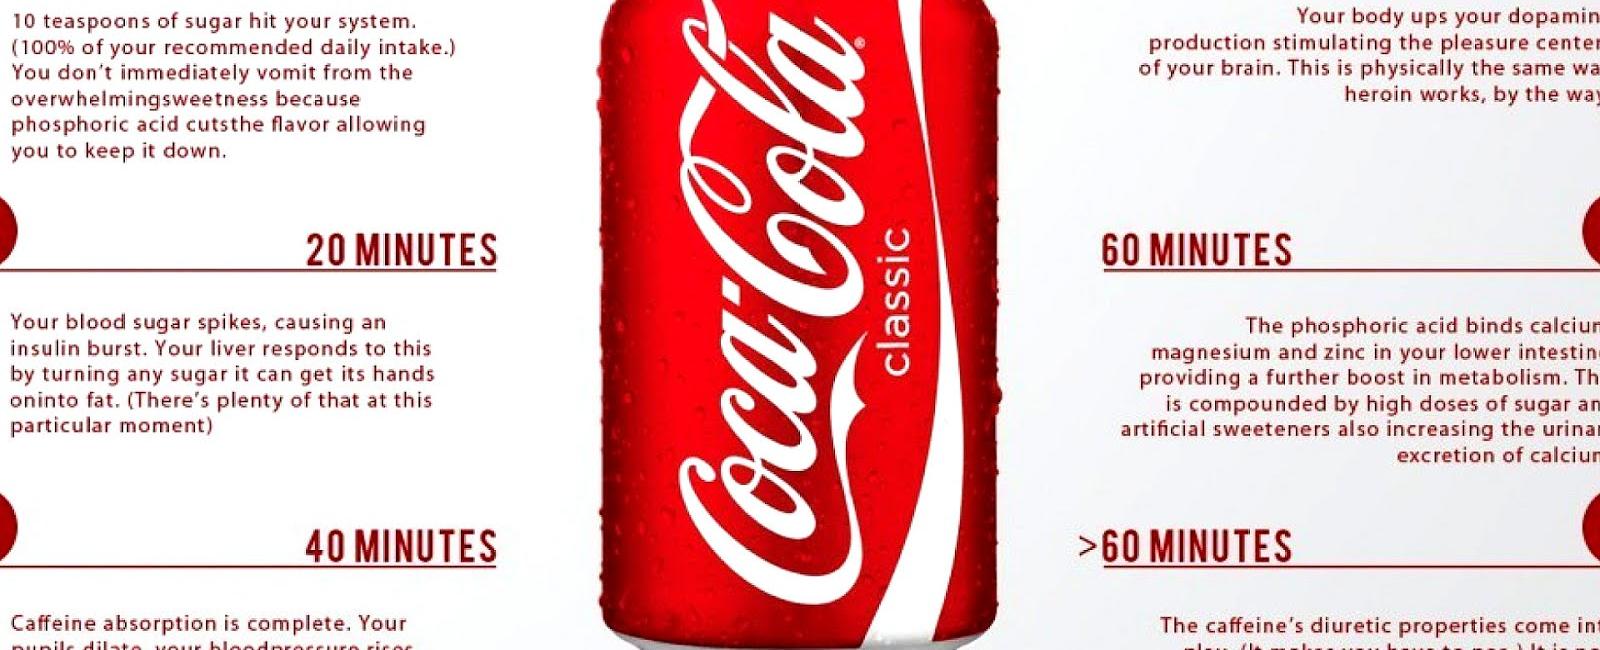 How many teaspoons of sugar are in a can of coke about 7 teaspoons